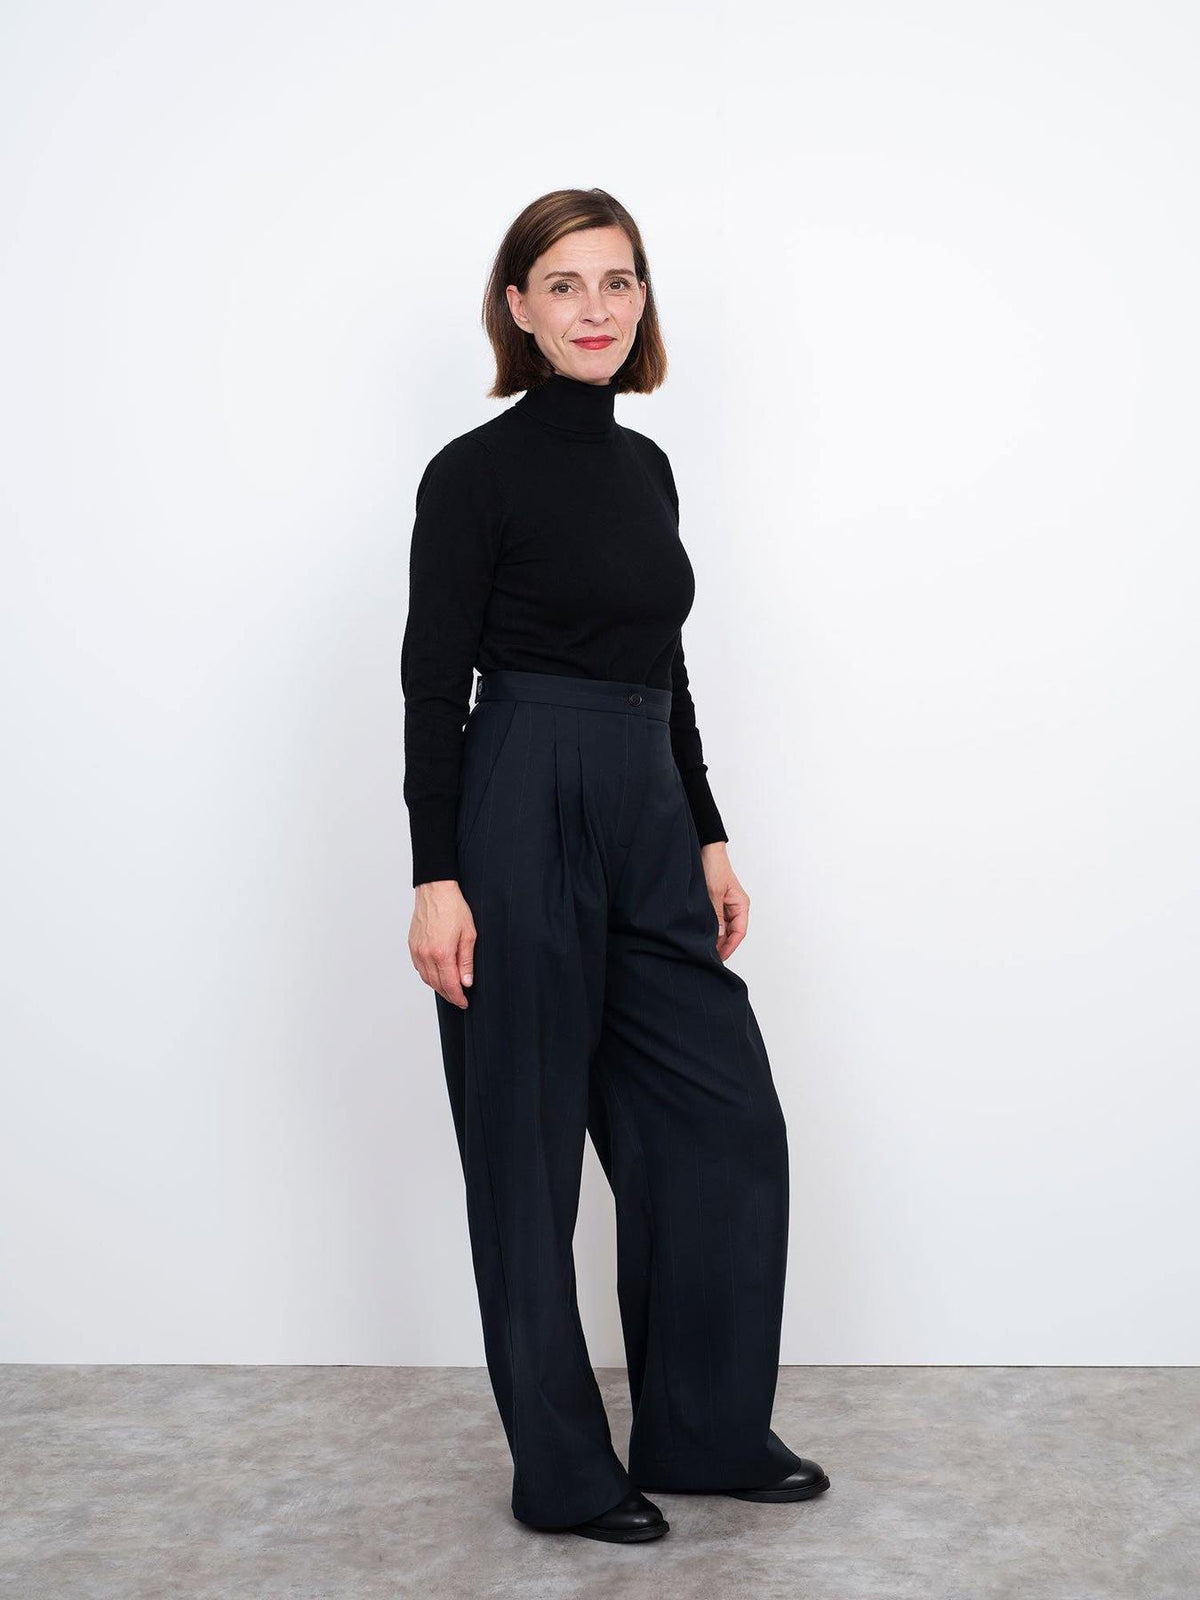 High Waist Trousers - The Assembly Line - MaaiDesign